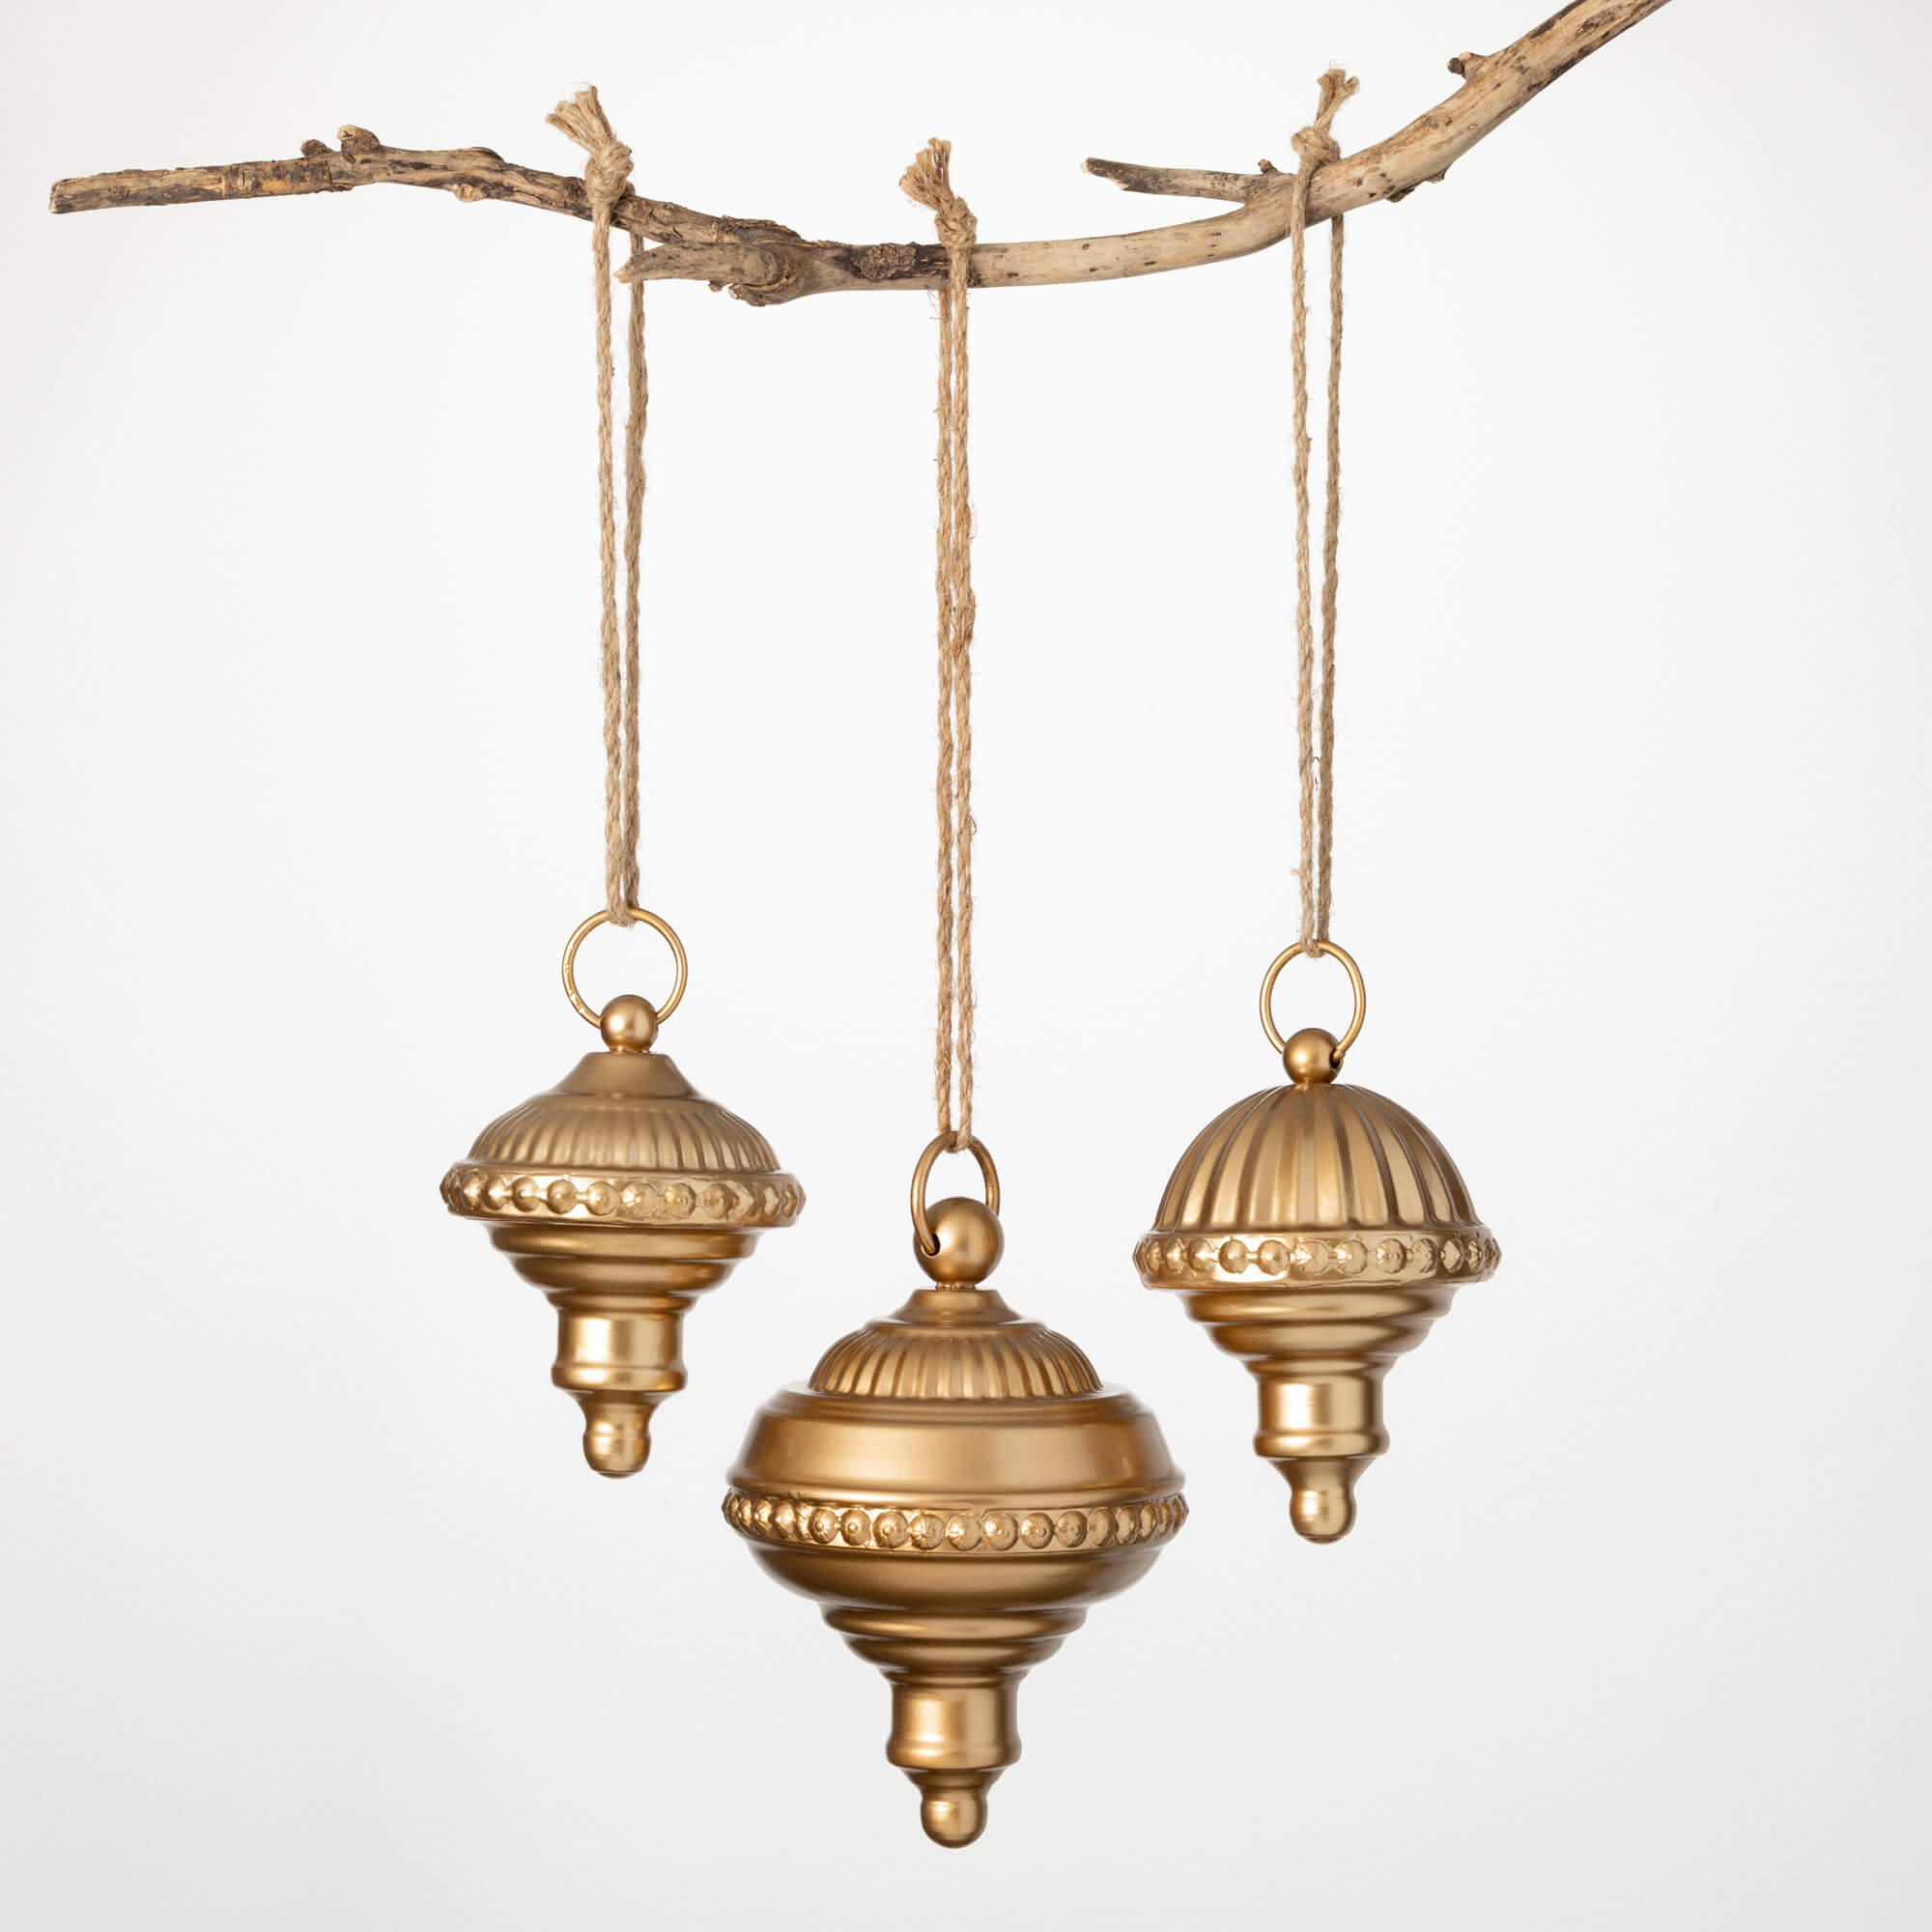 VINTAGE GOLD FINIAL ORNAMENTS